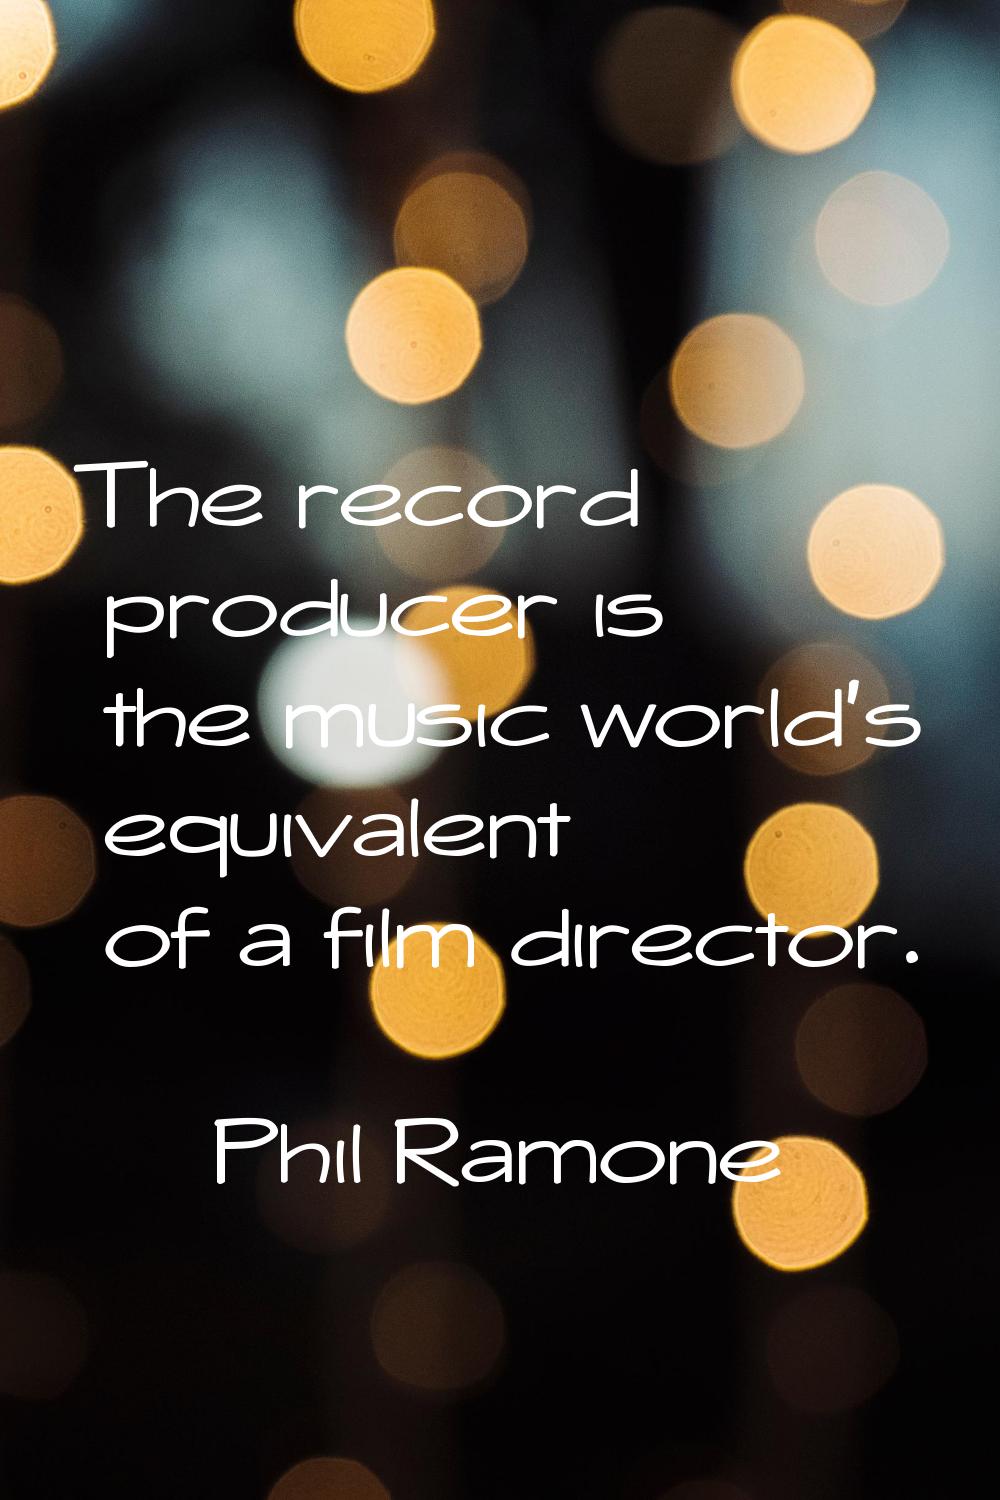 The record producer is the music world's equivalent of a film director.